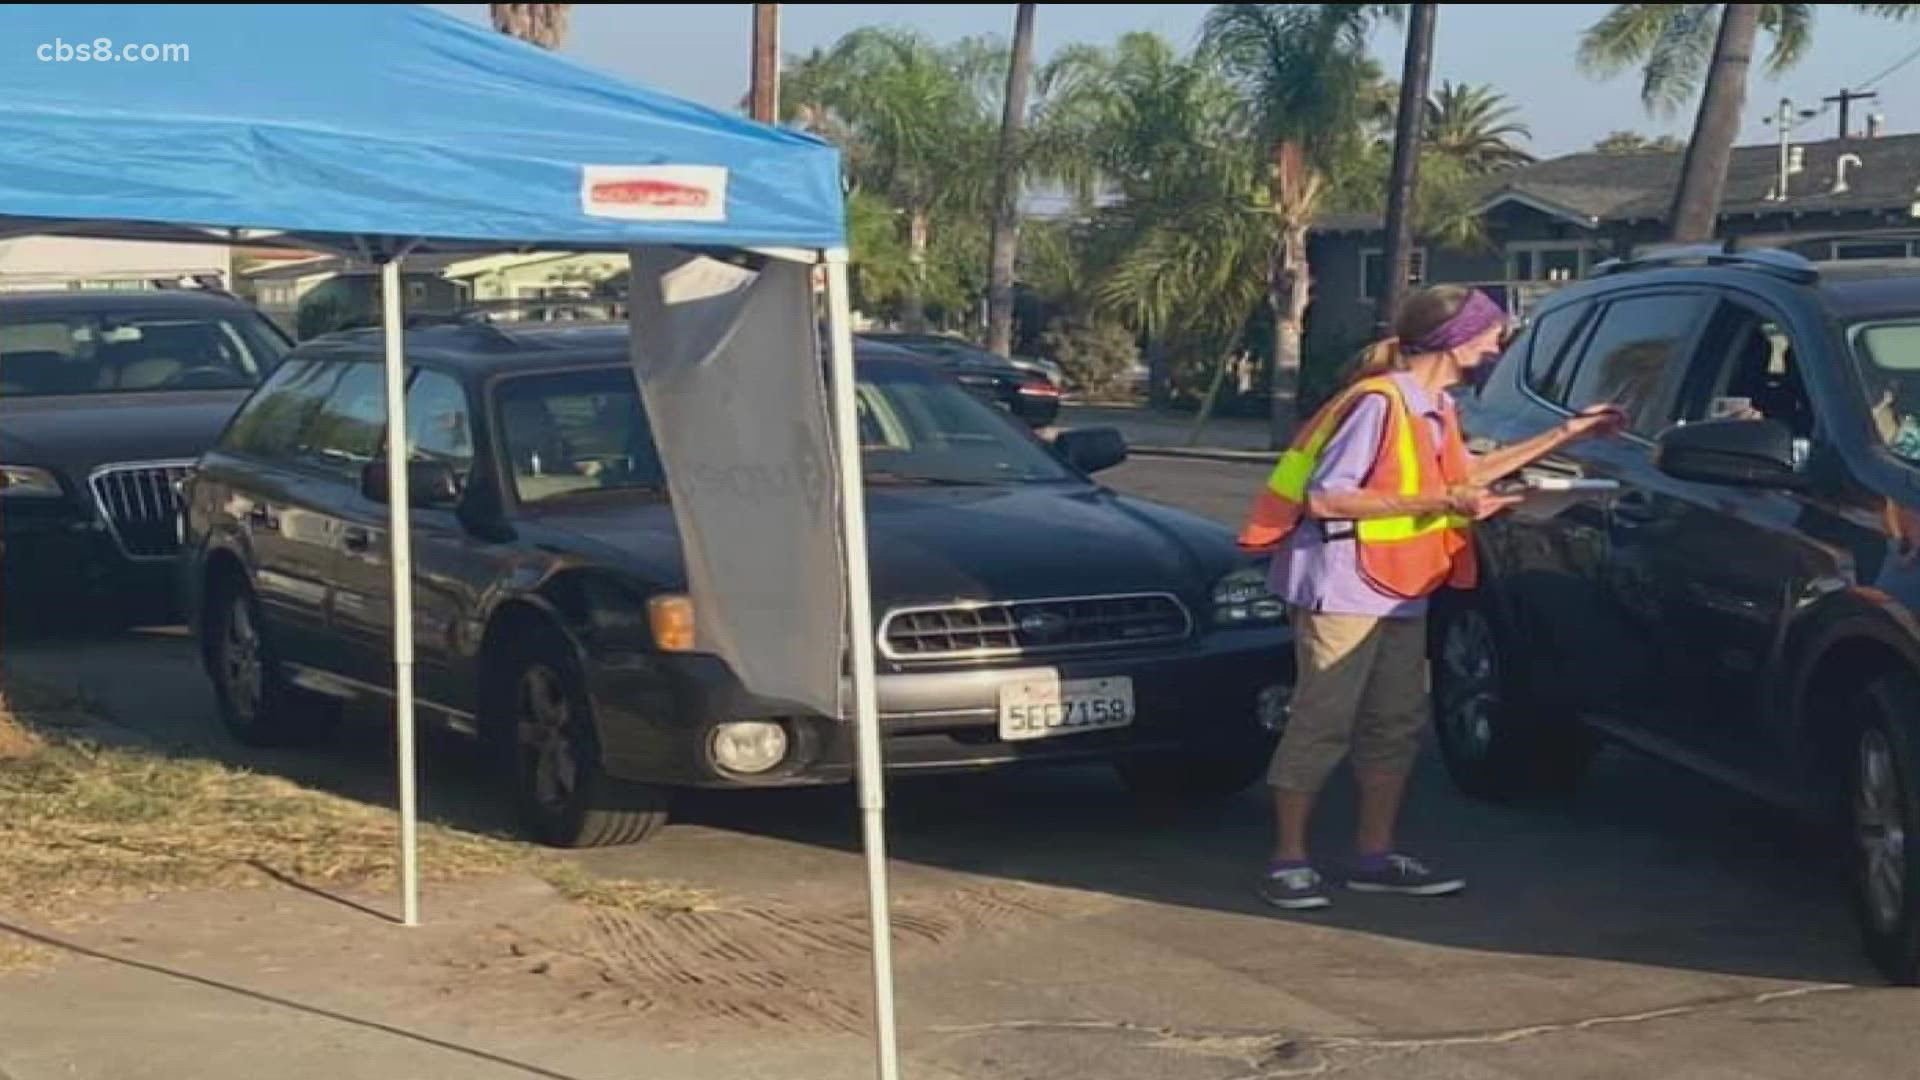 Uptown Community Service Center's small food distribution site in North Park is under investigation by the City of San Diego for violating city codes.